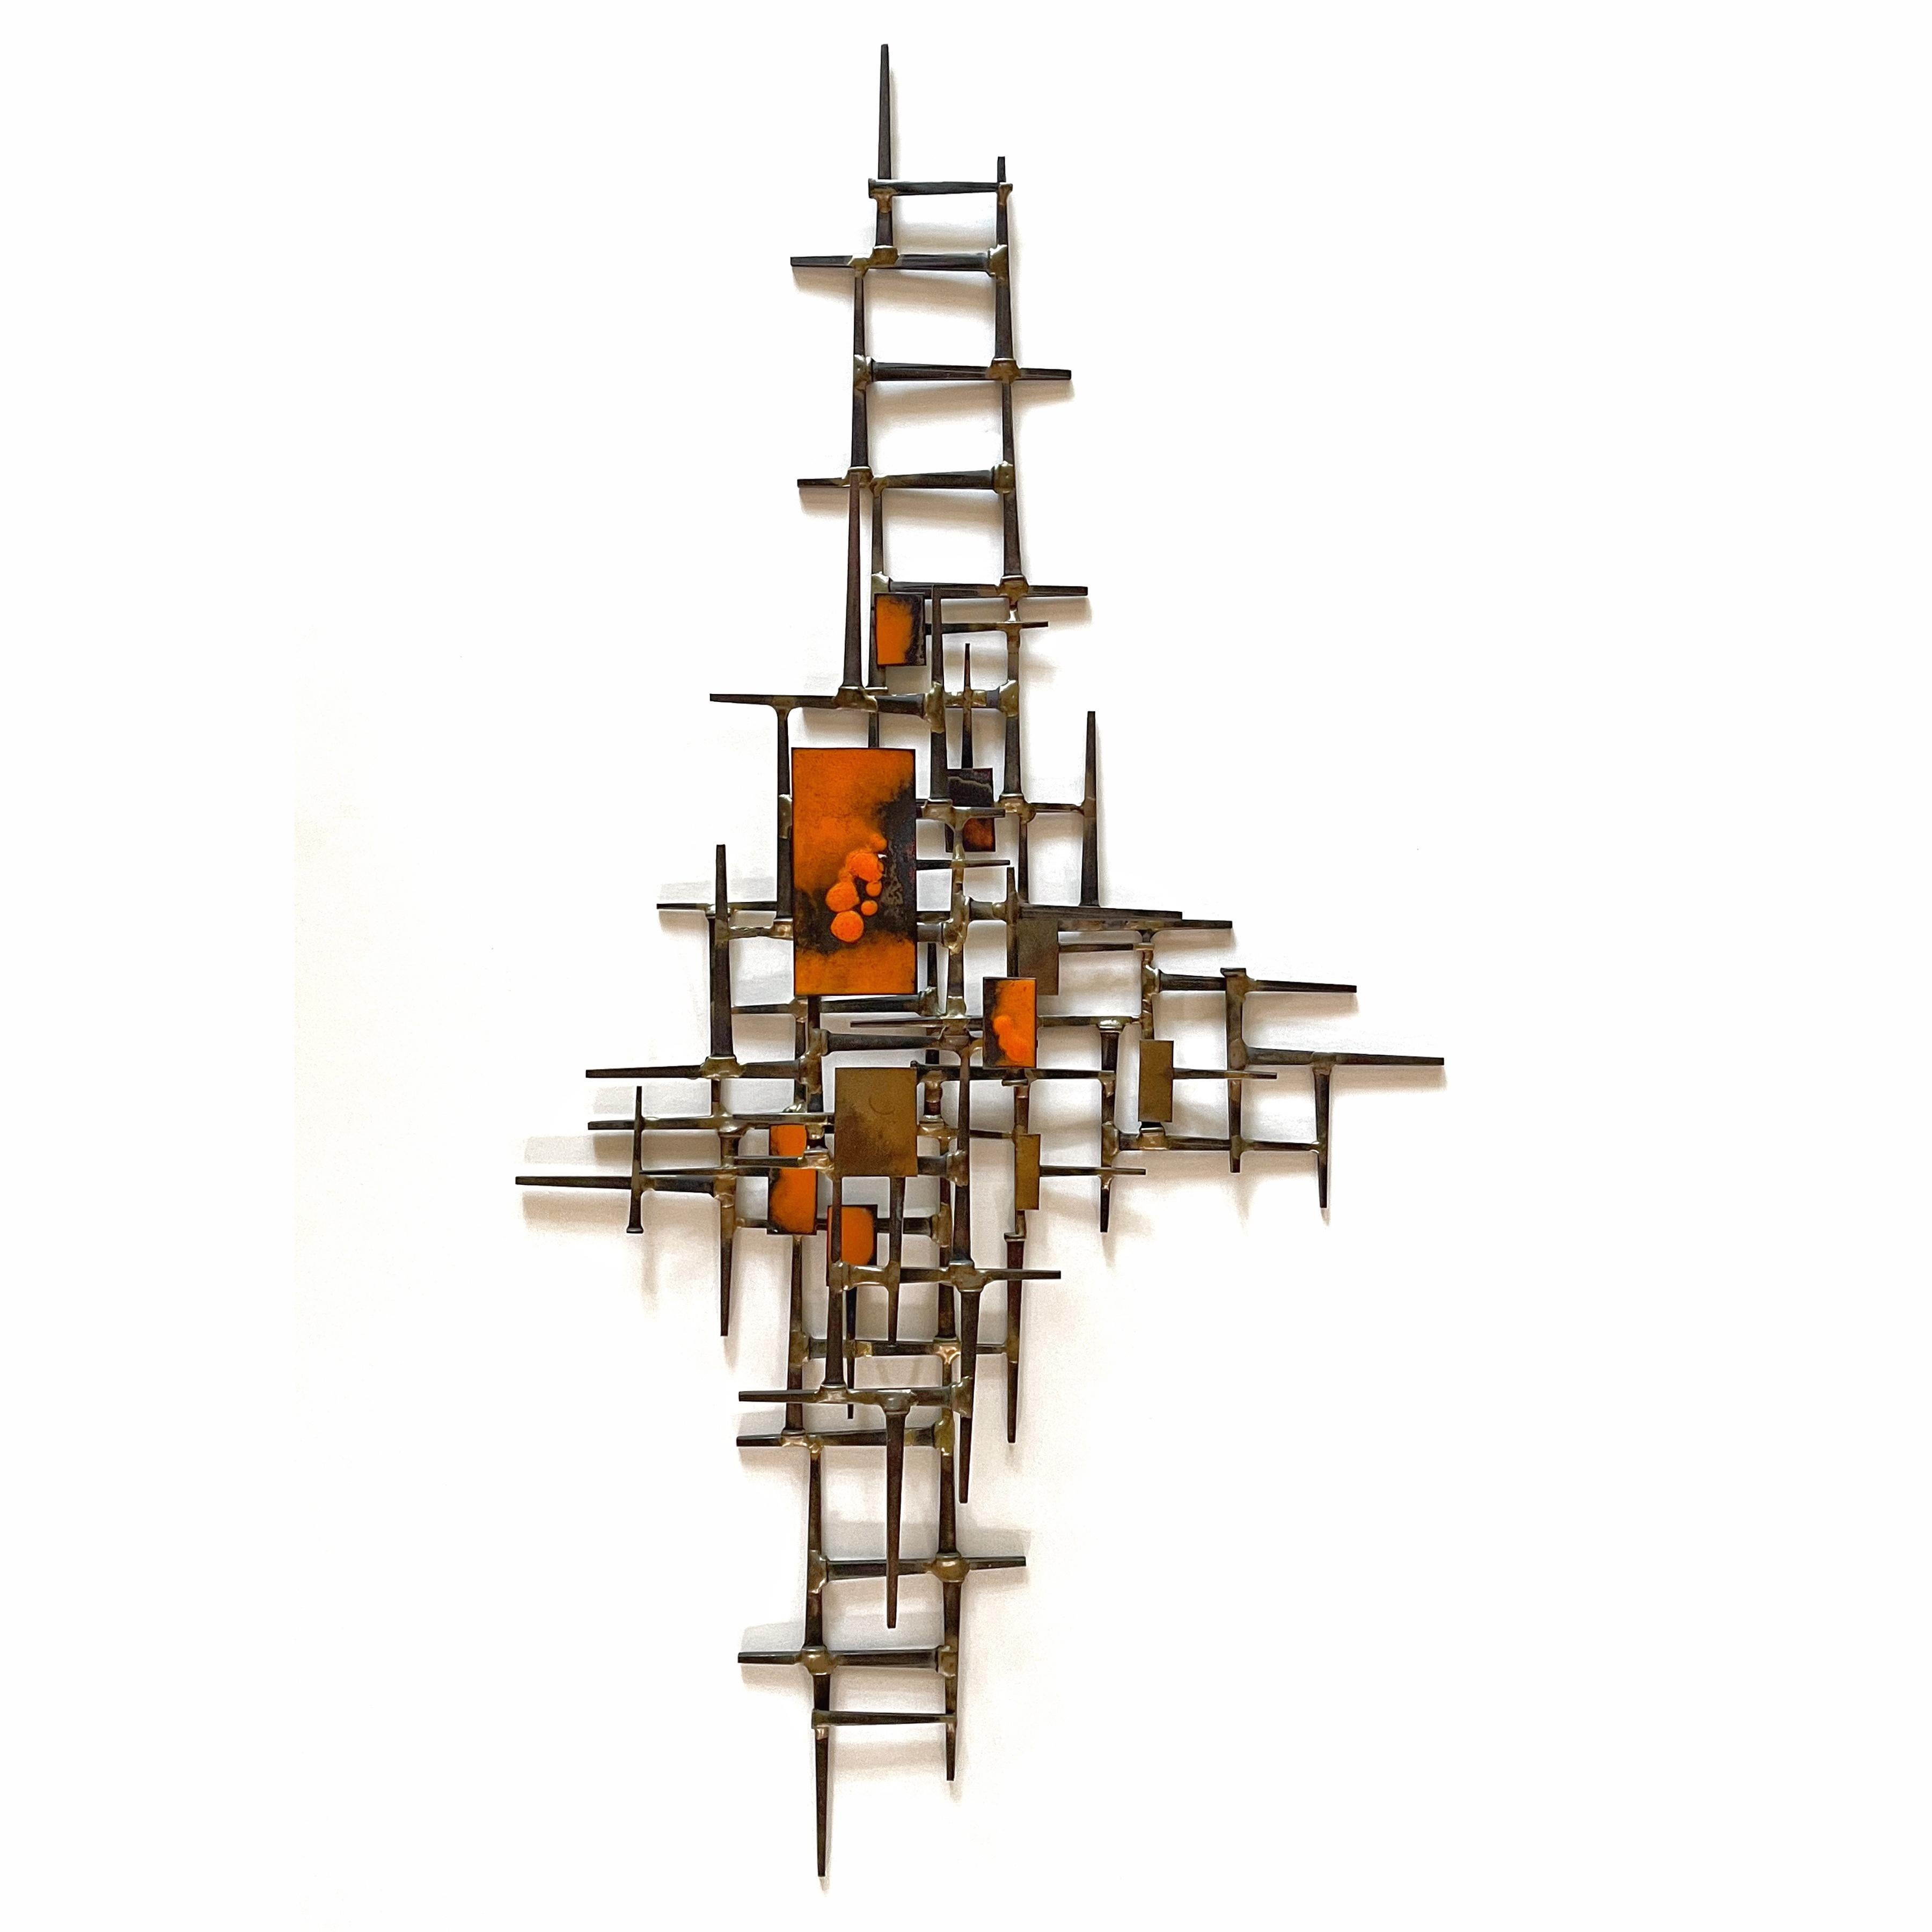 Abstract Wall Sculpture in Iron, Bronze and Enamel In Good Condition For Sale In Highland, IN